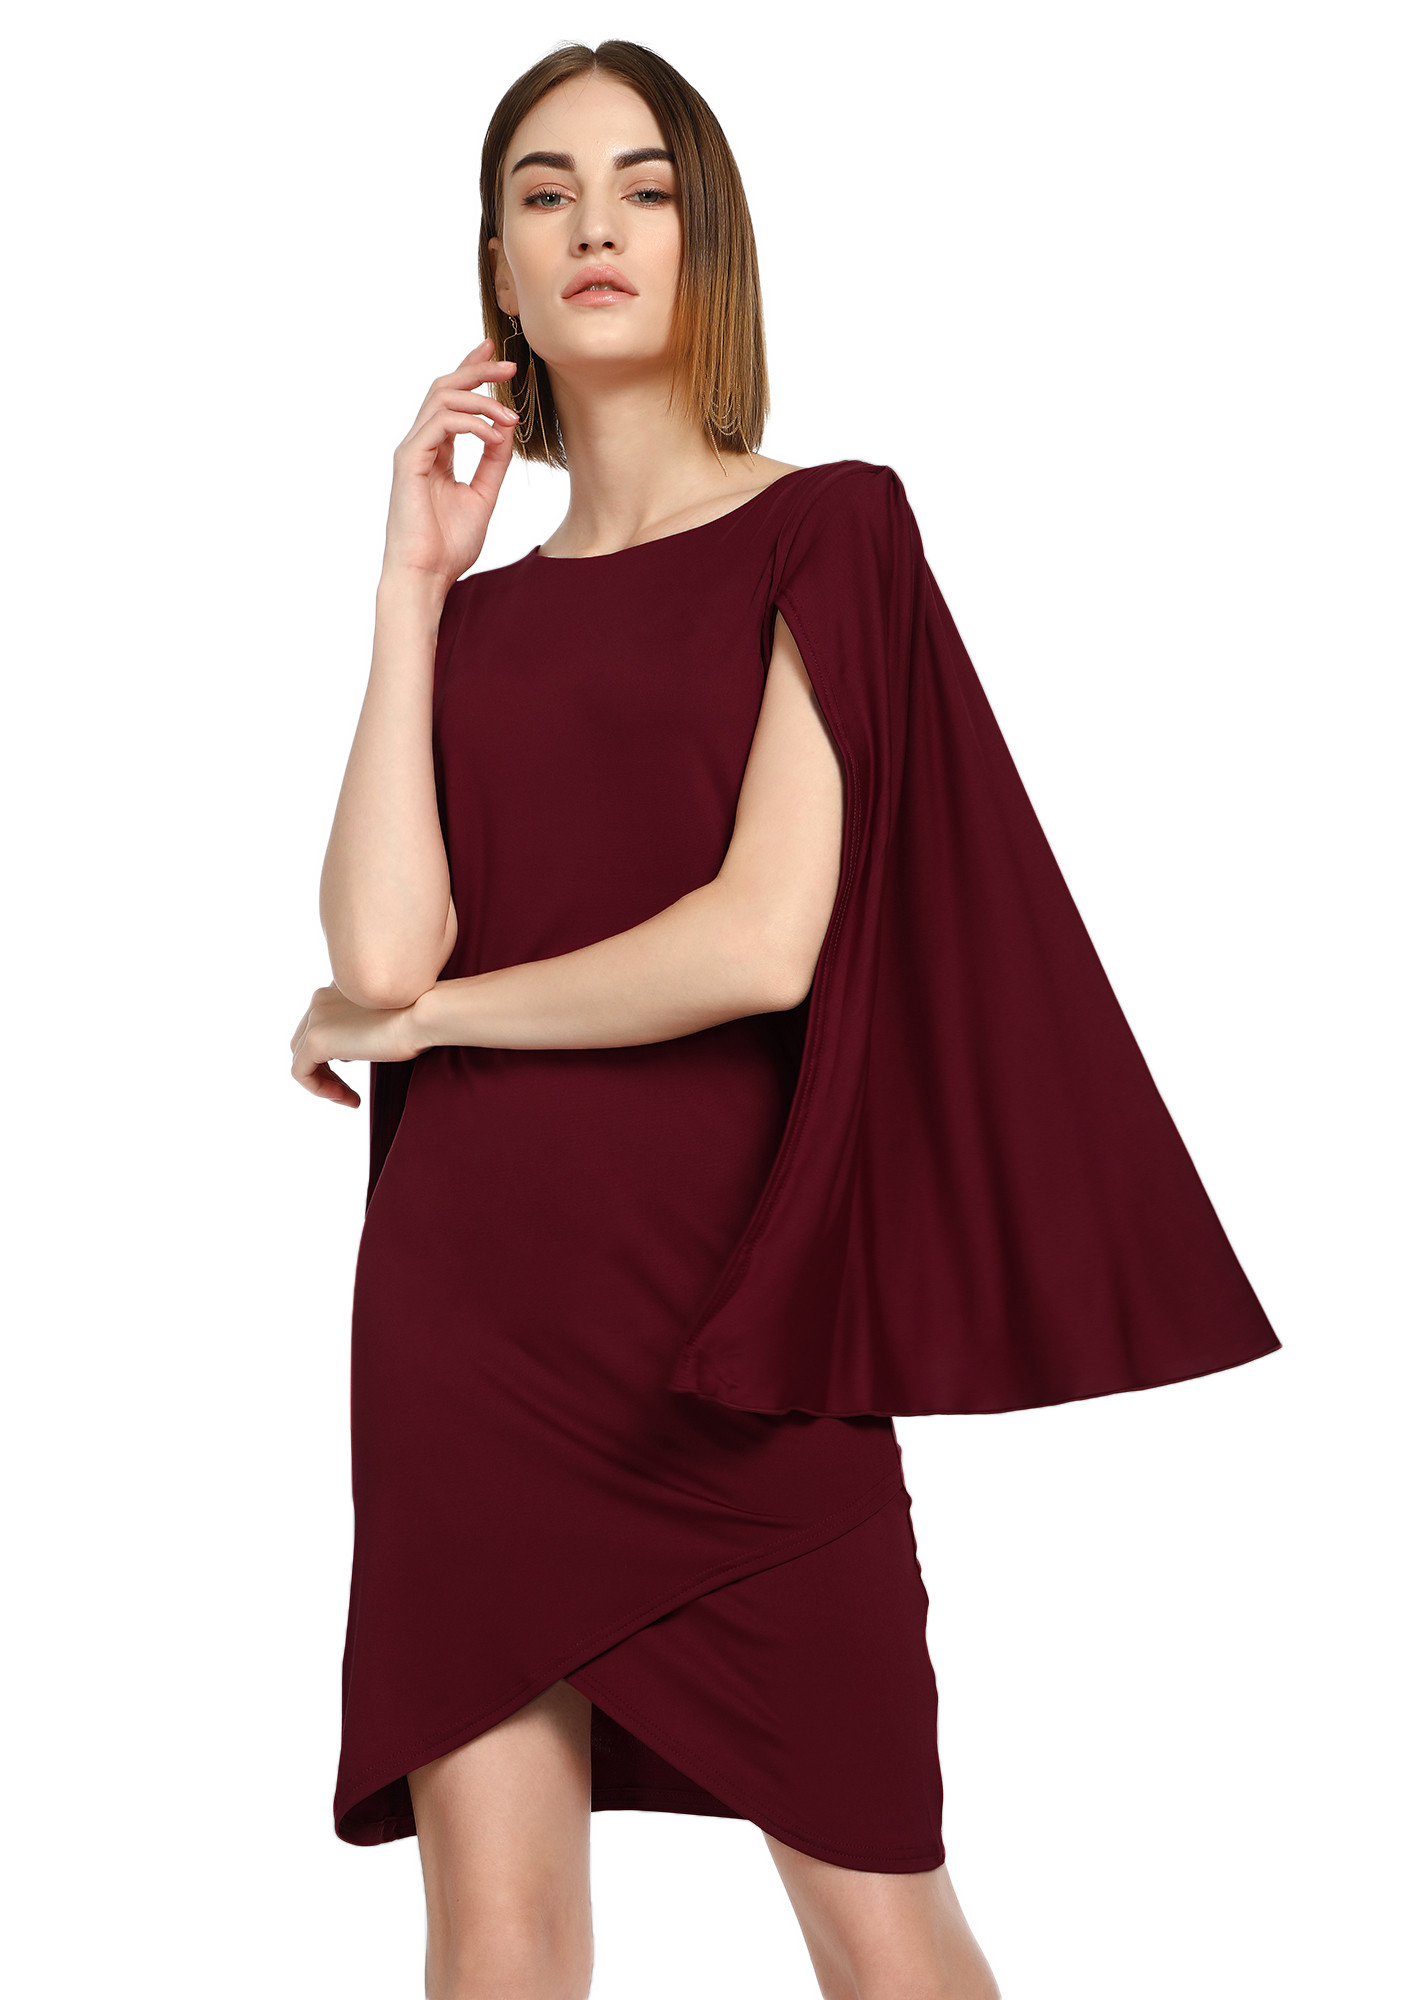 HOW ARE YOU CAPE MAROON ASYMMETRICAL DRESS